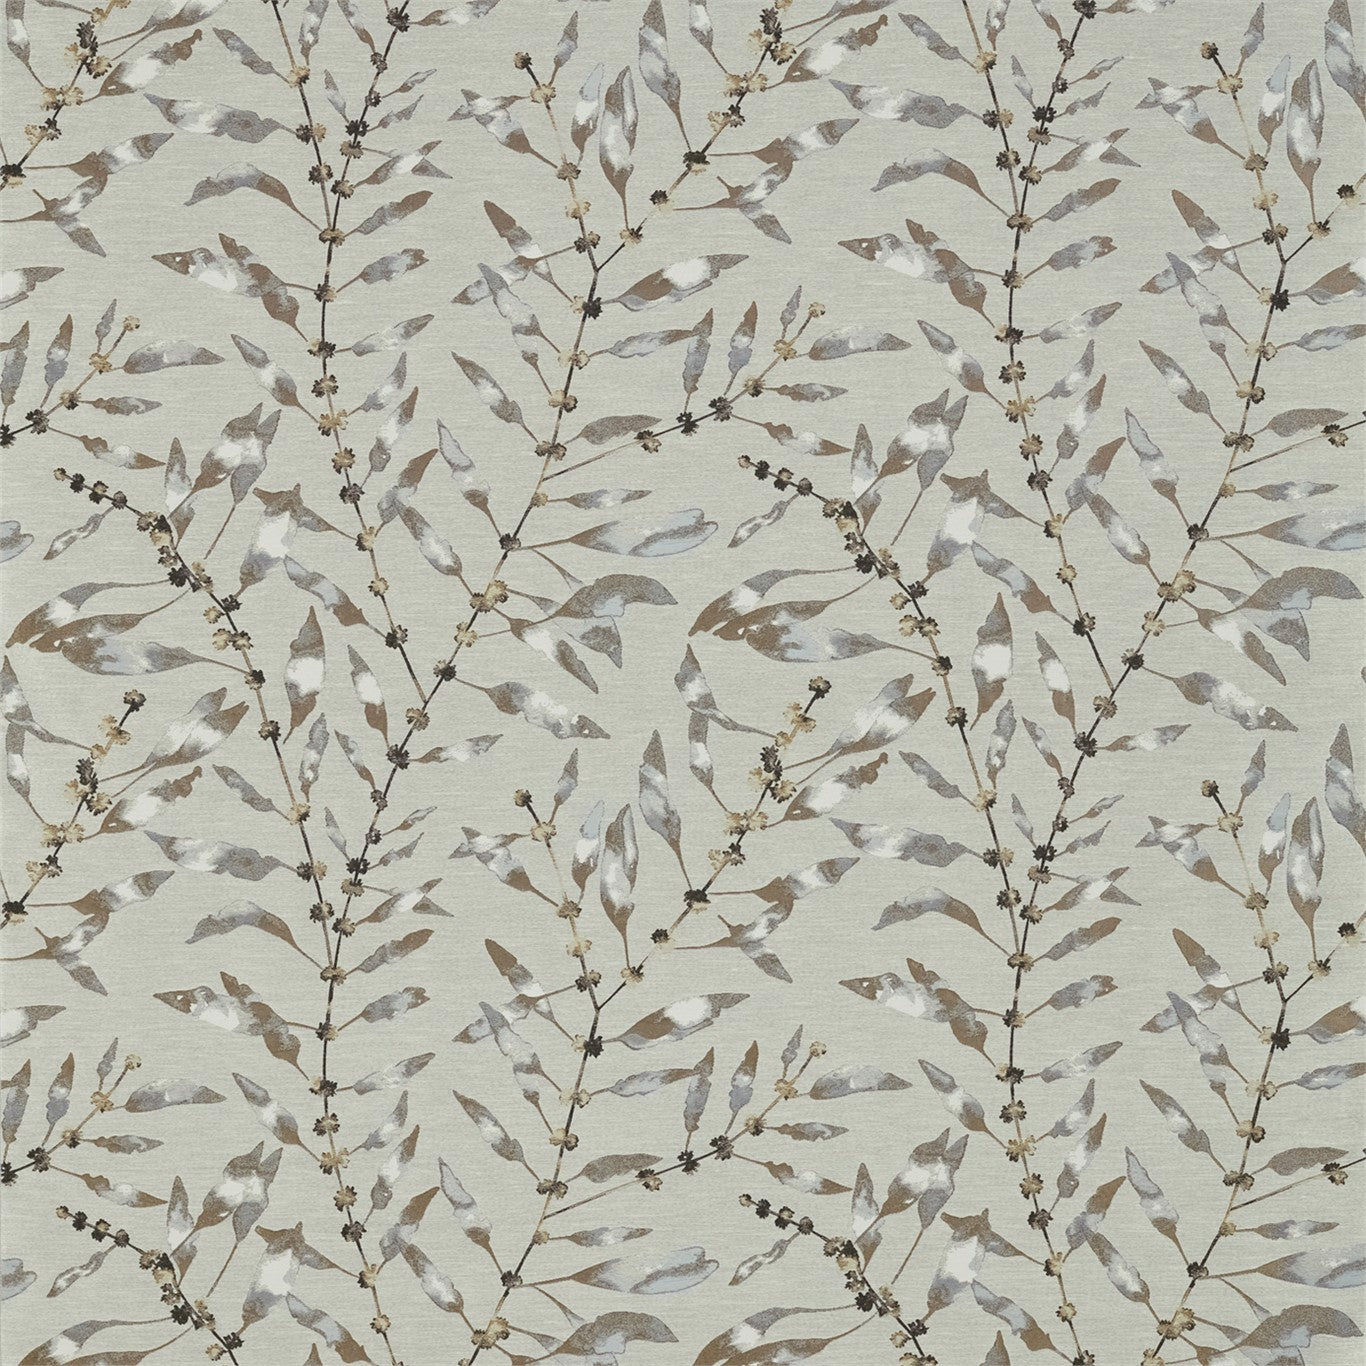 Chaconia Fabric by Harlequin - HANZ132292 - Brass/Ink